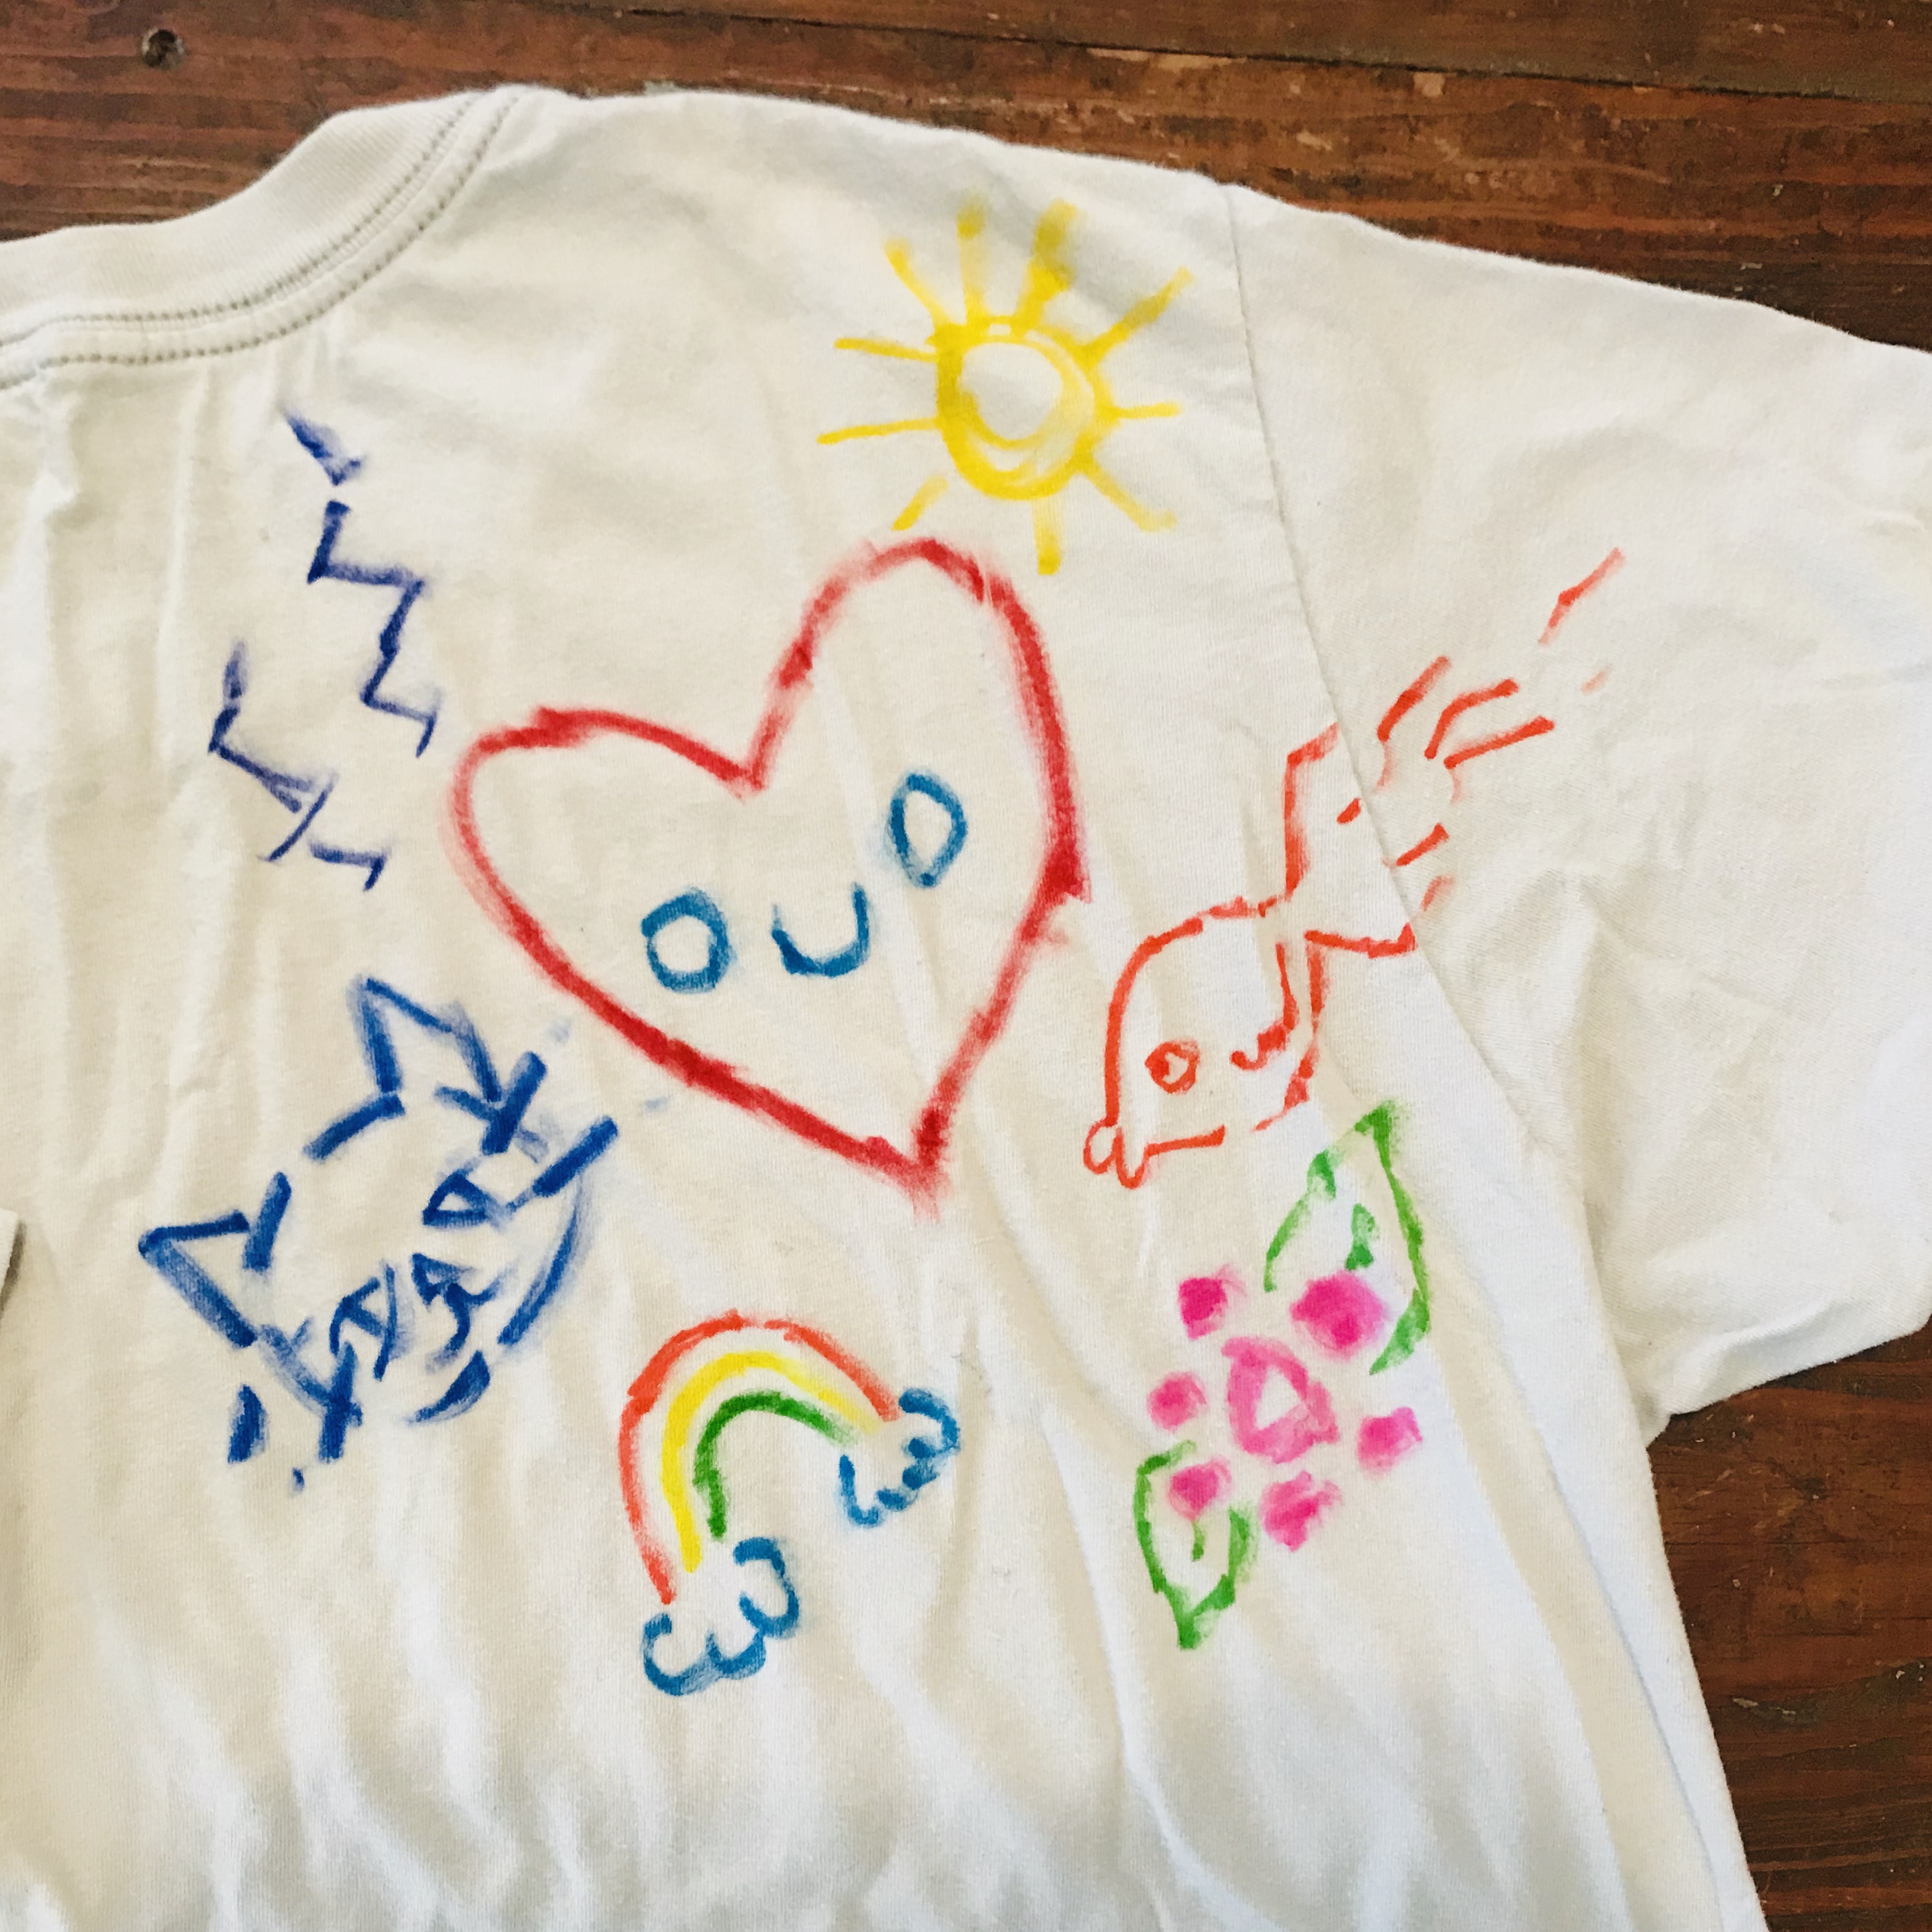 White t-shirt with colorful designs